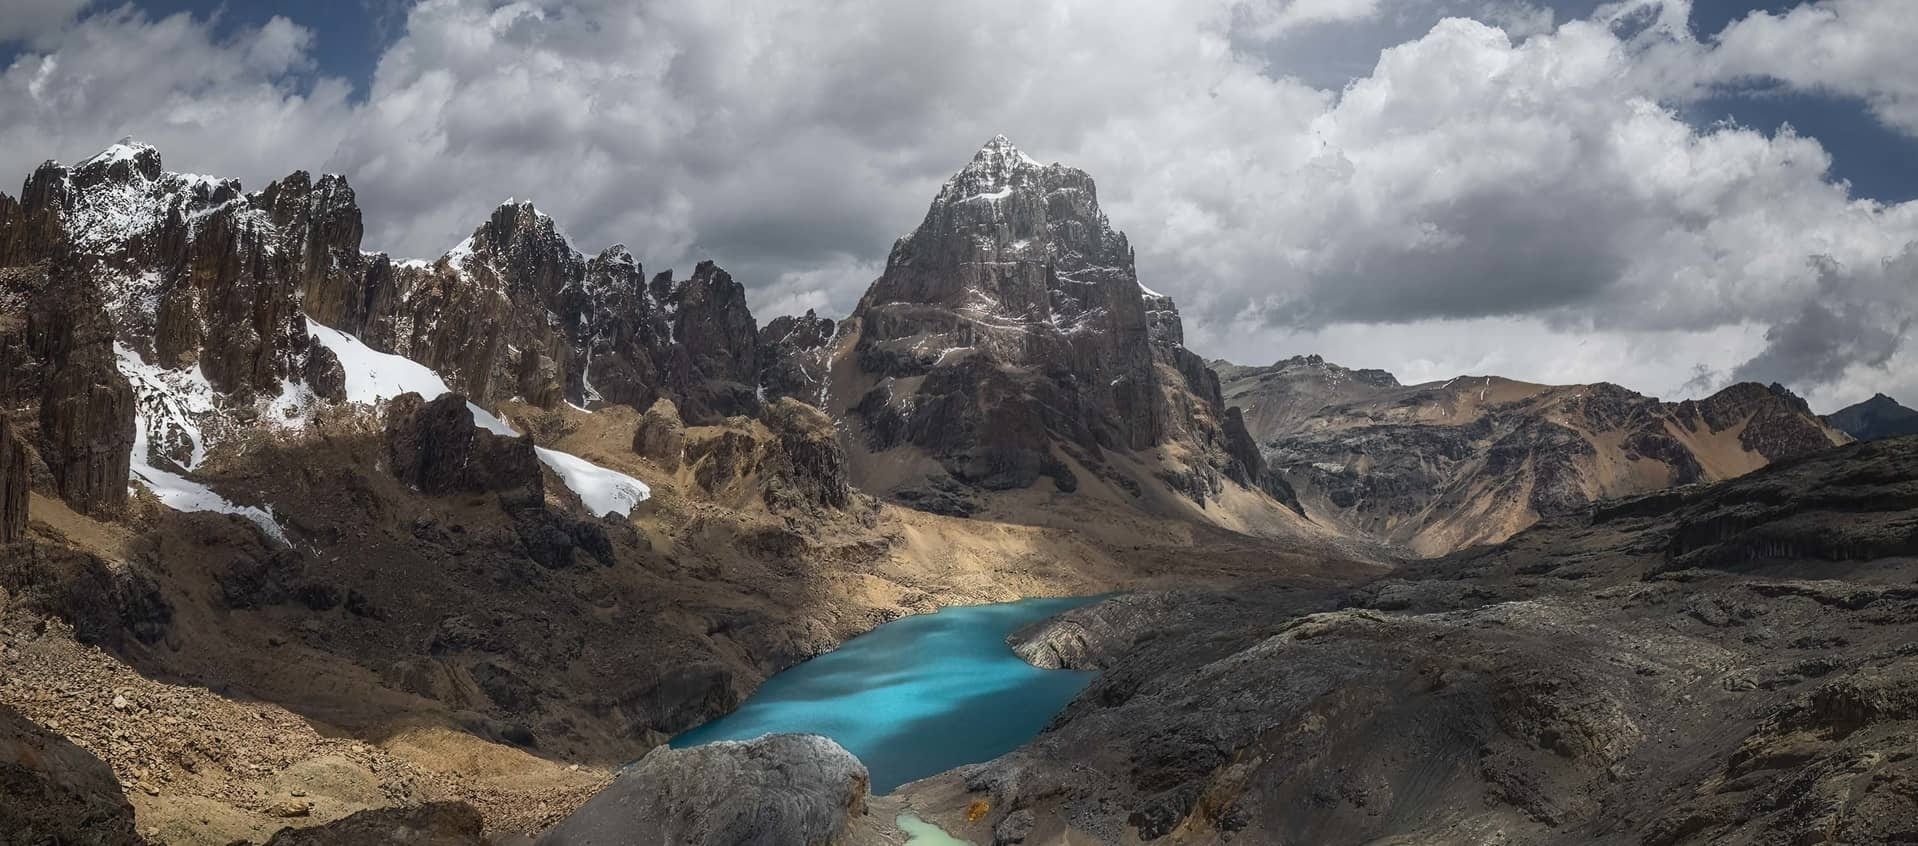 Hiking in the Peruvian Andes with a guide, photography tour